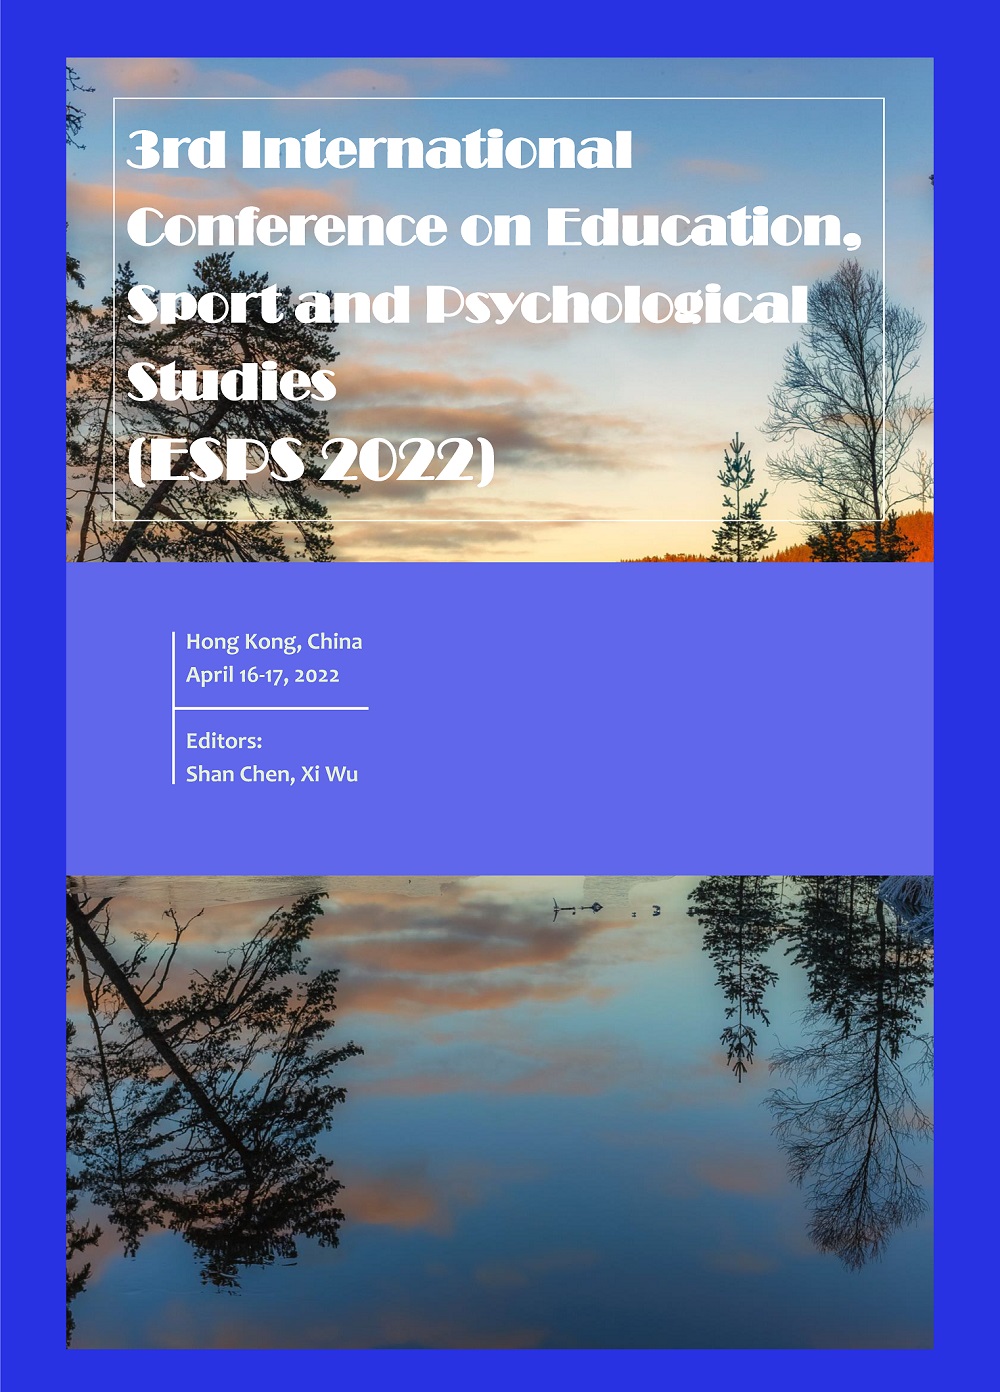 					View Vol. 4 (2022): 3rd International Conference on Education, Sport and Psychological Studies (ESPS 2022)
				